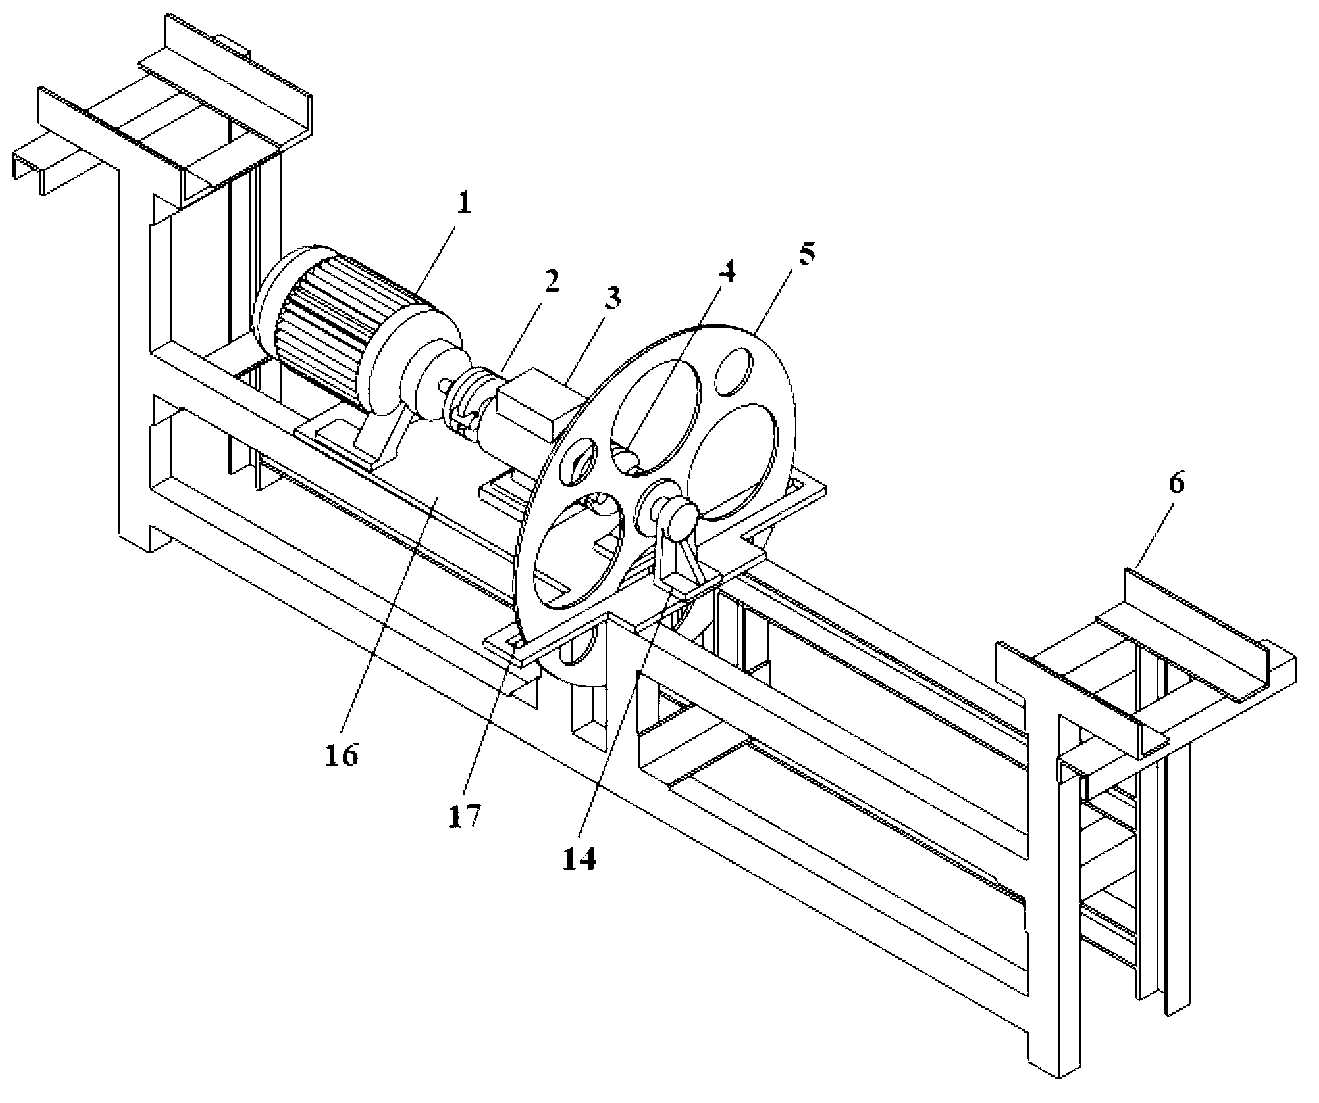 Resistance testing device for cable-towed ship model